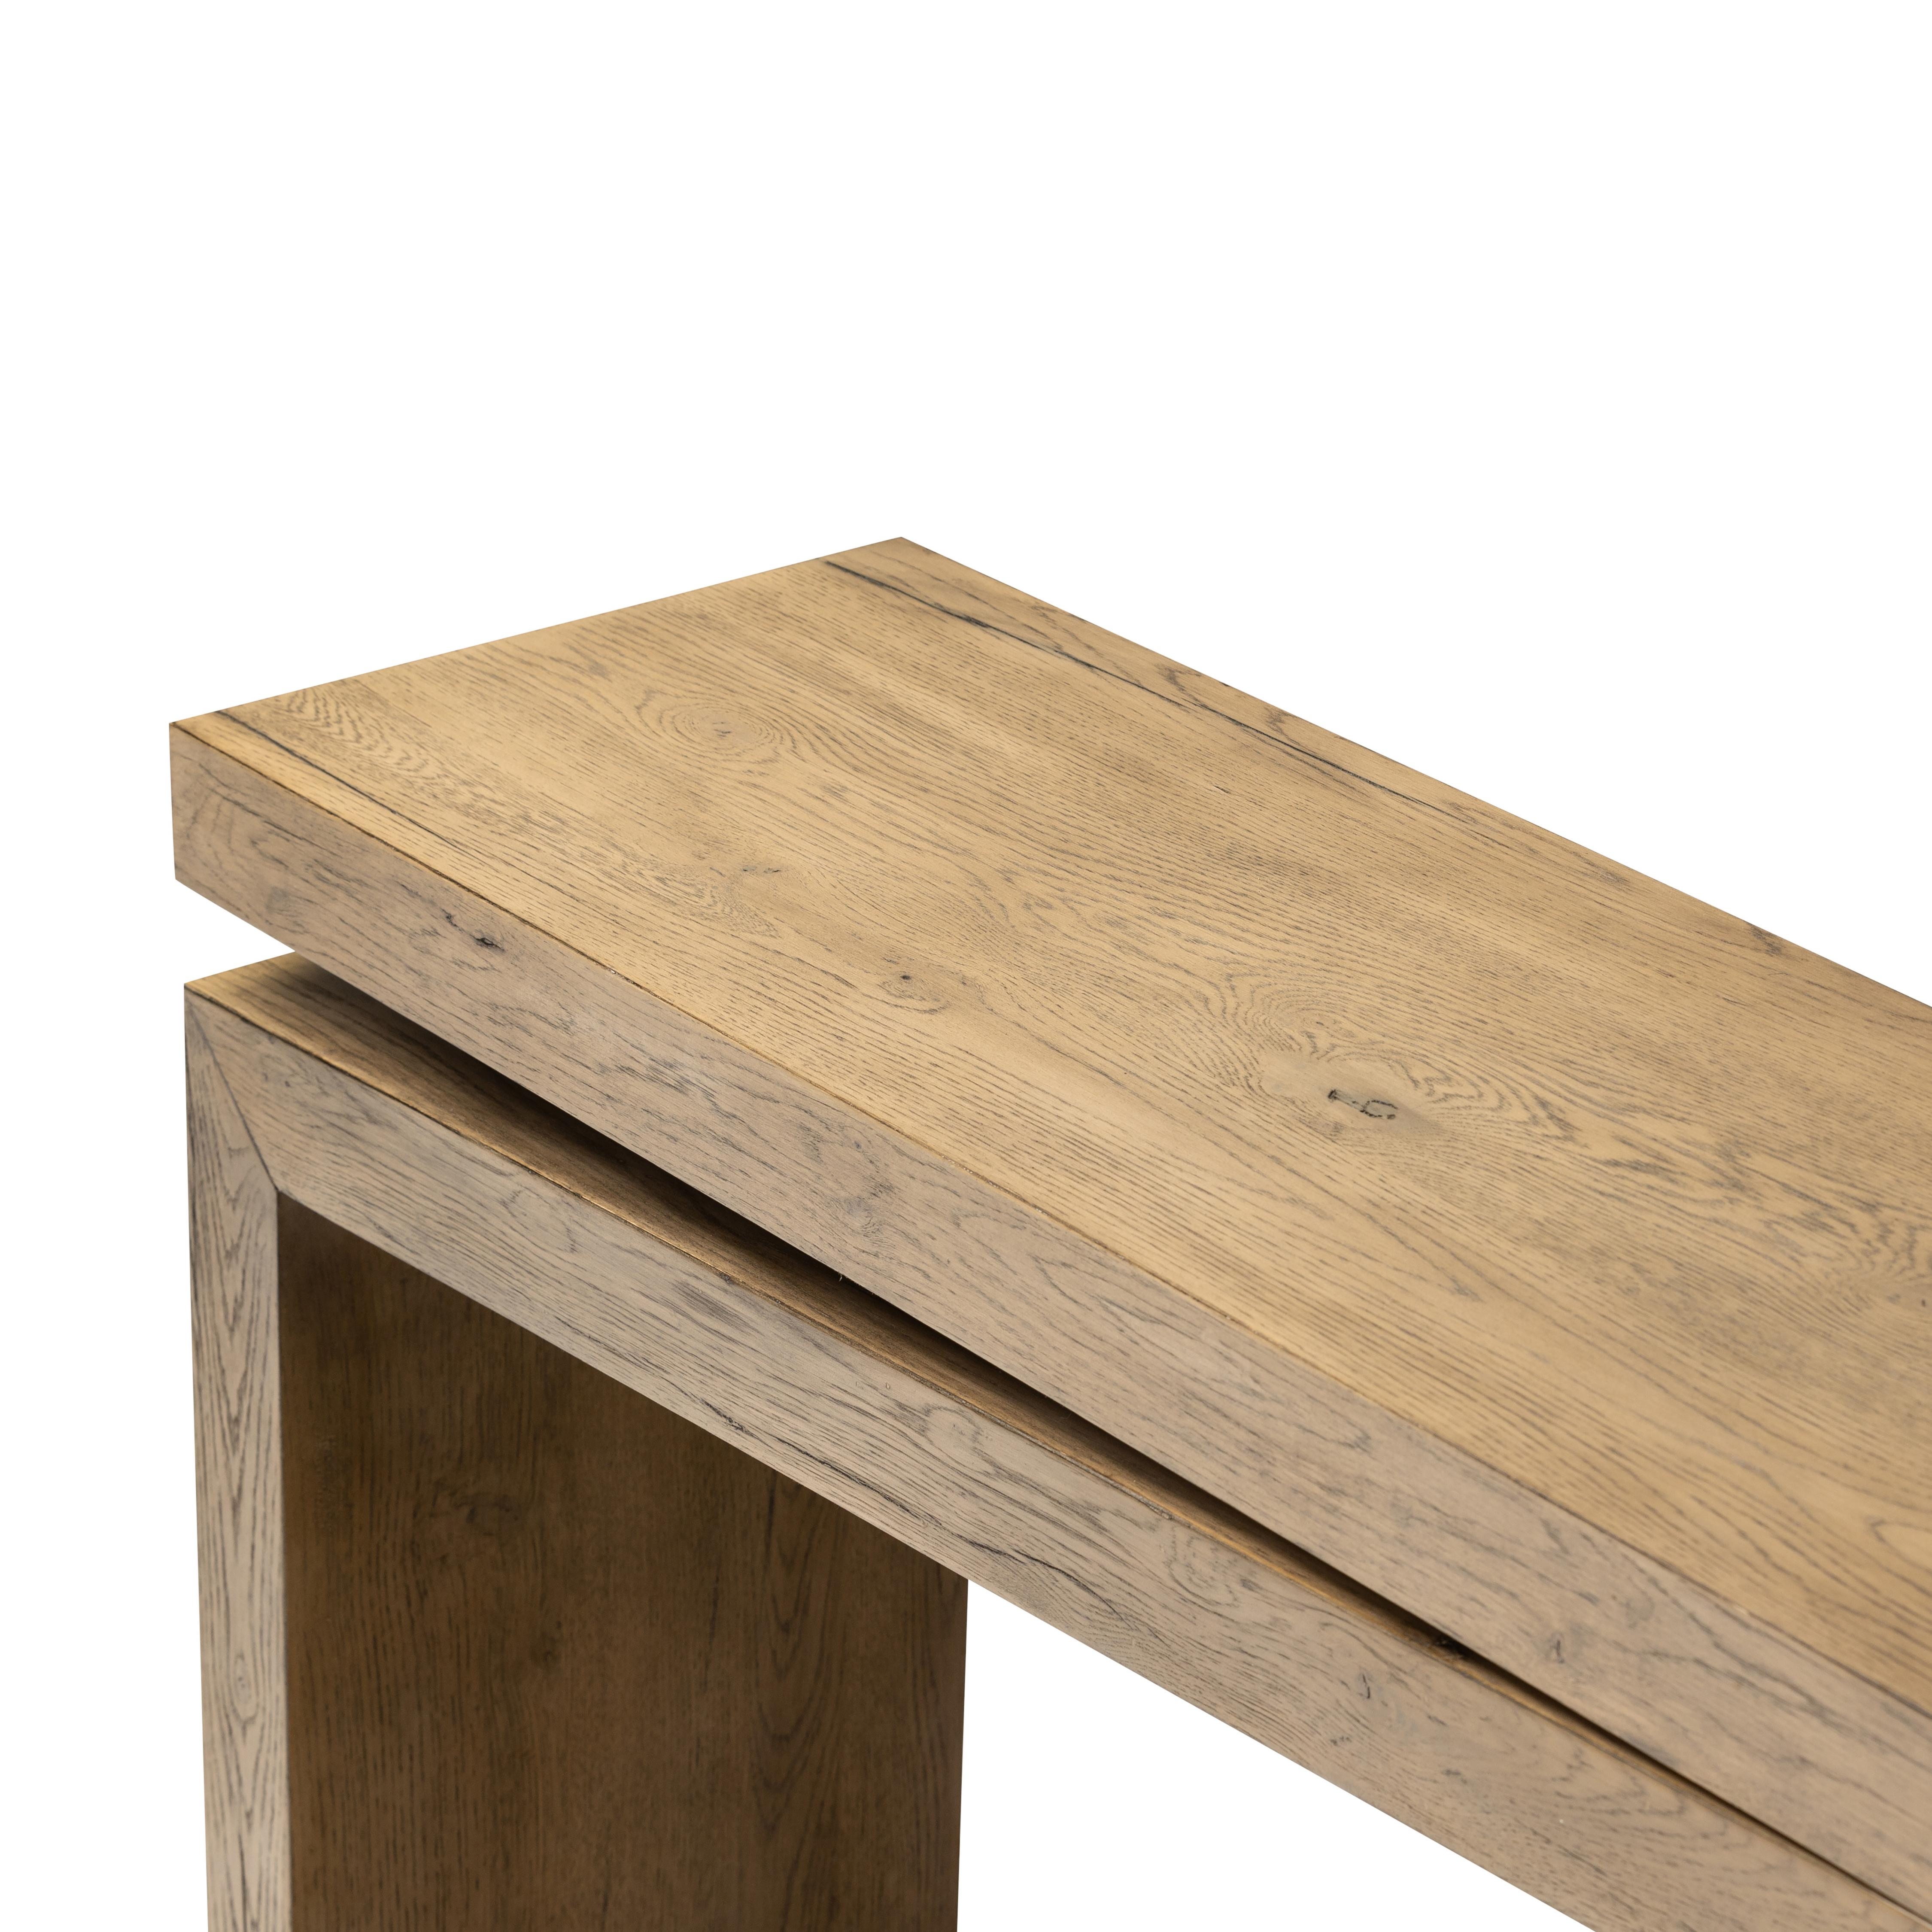 Matthes Console Table-Rustic Natural - Image 5